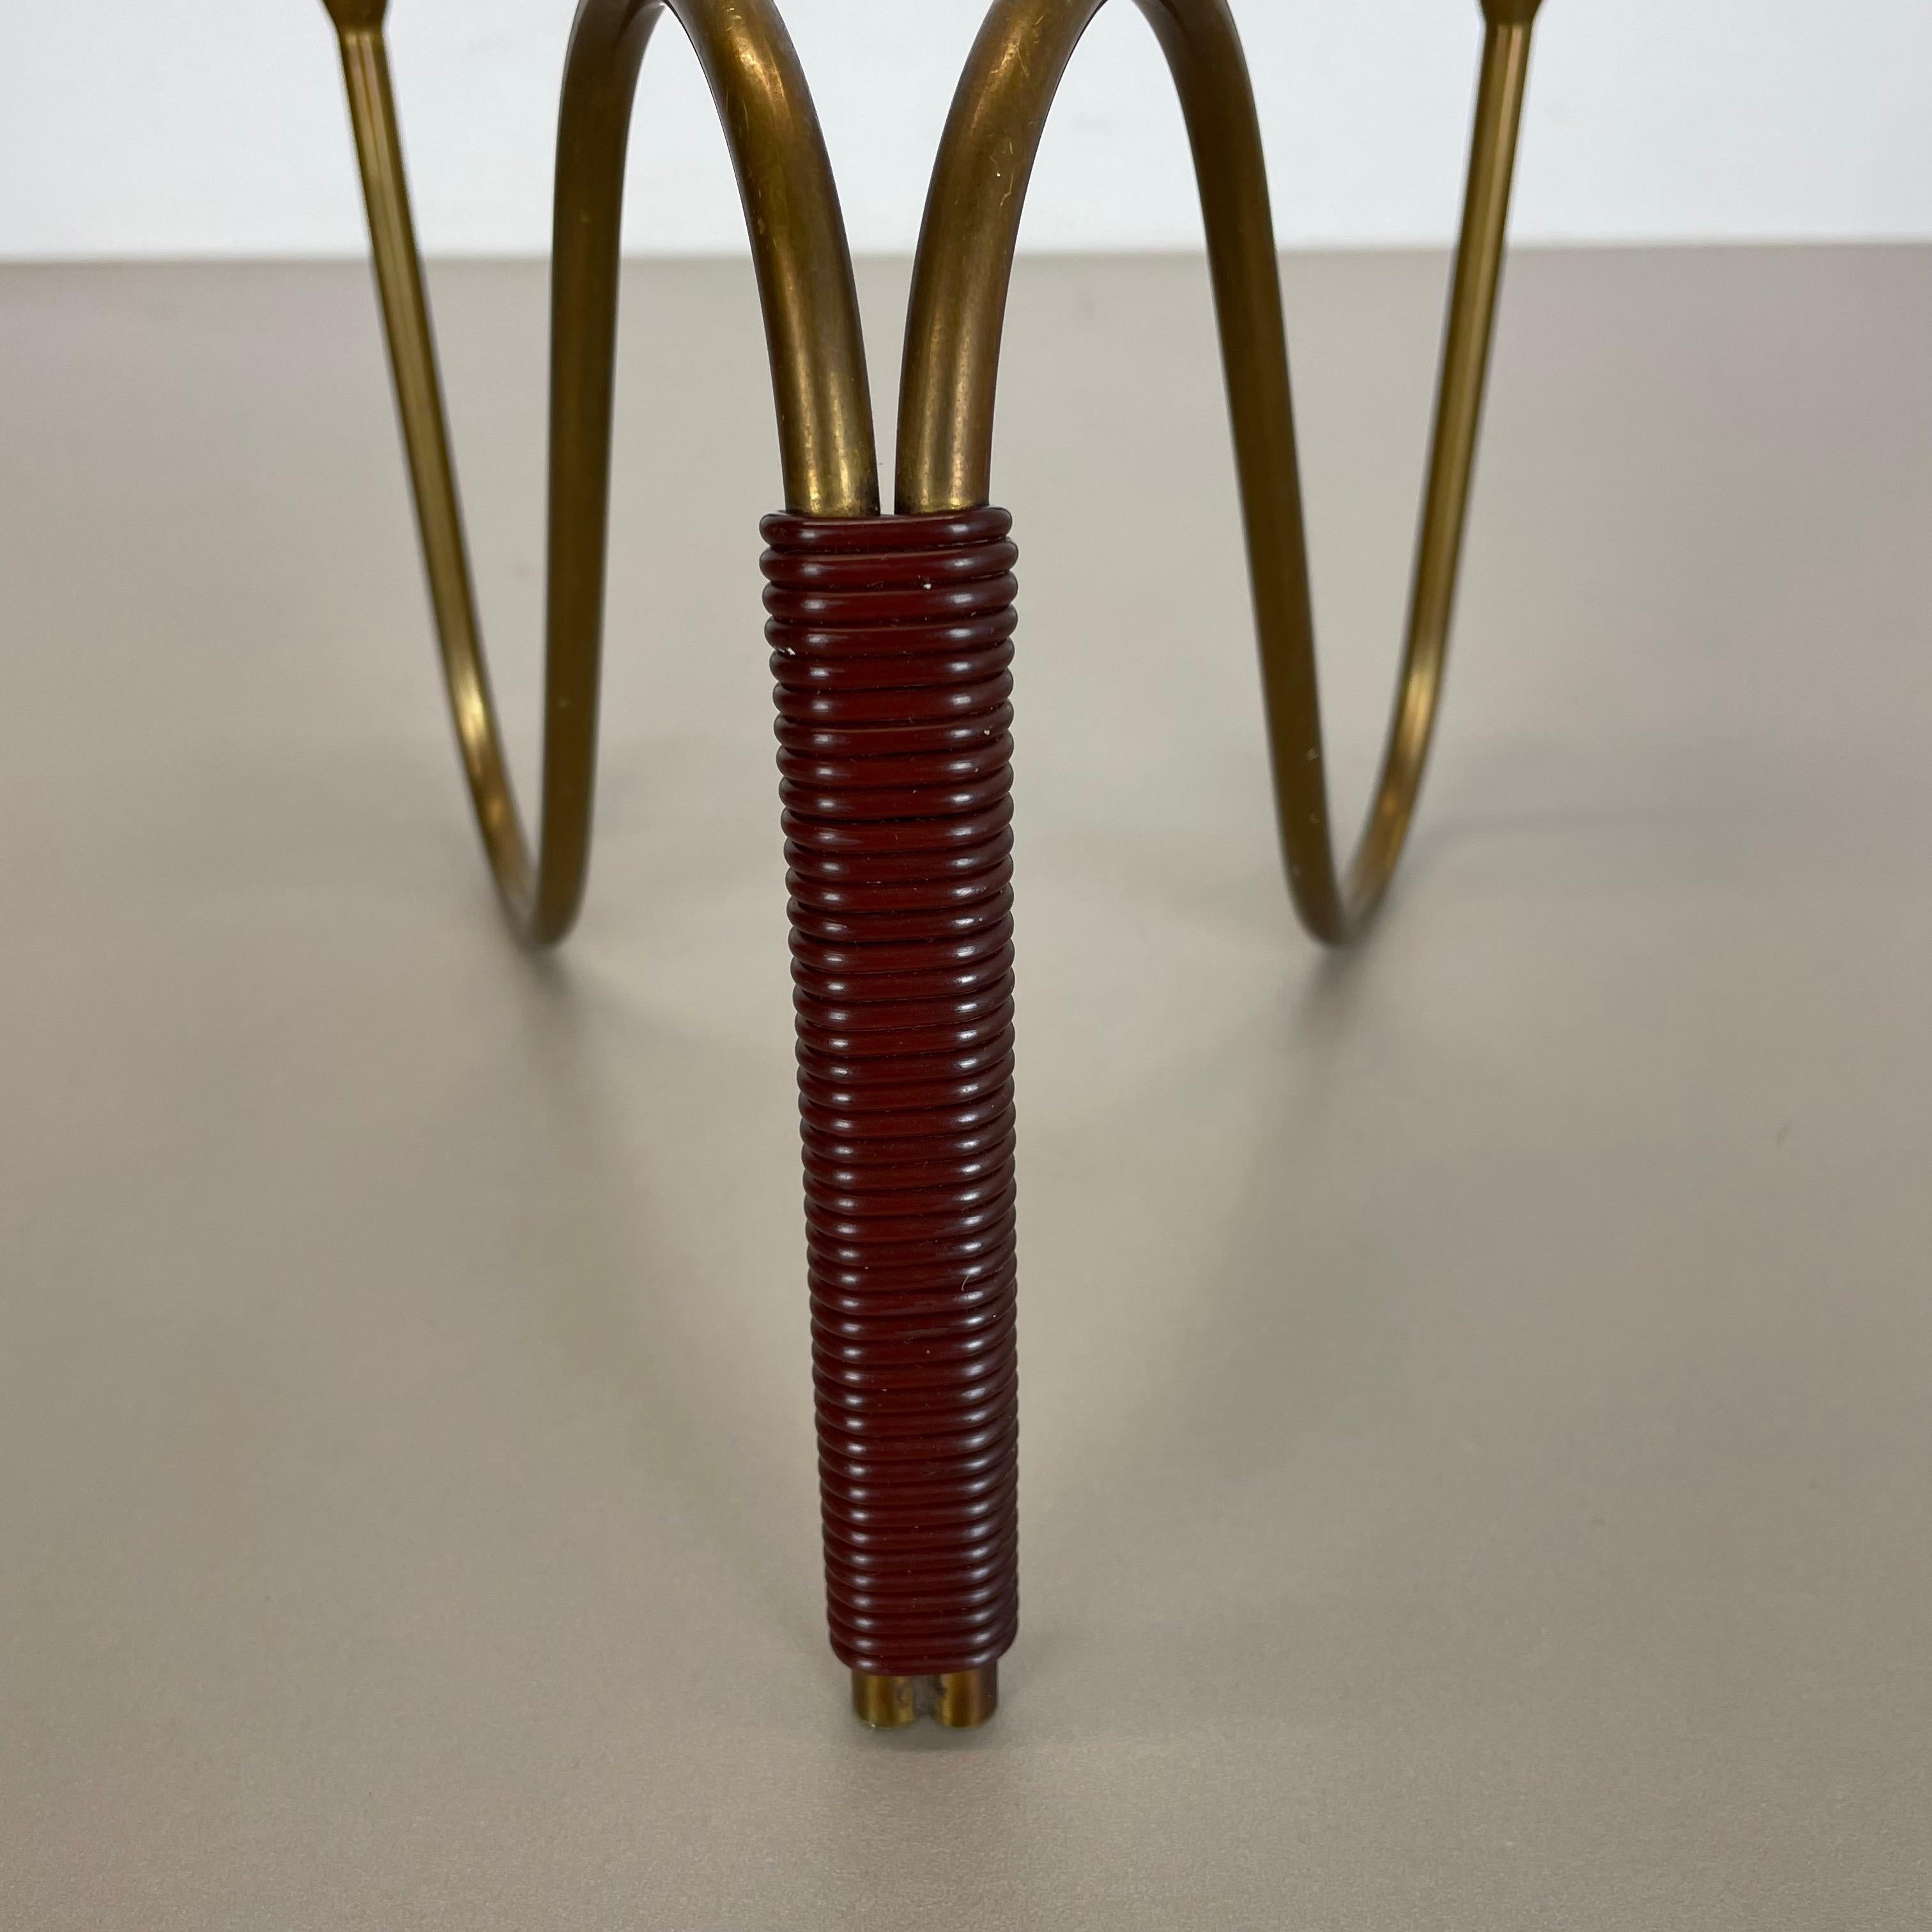 Sculptural Brass Candleholder Object by Günter Kupetz for WMF, Germany 1950s For Sale 4